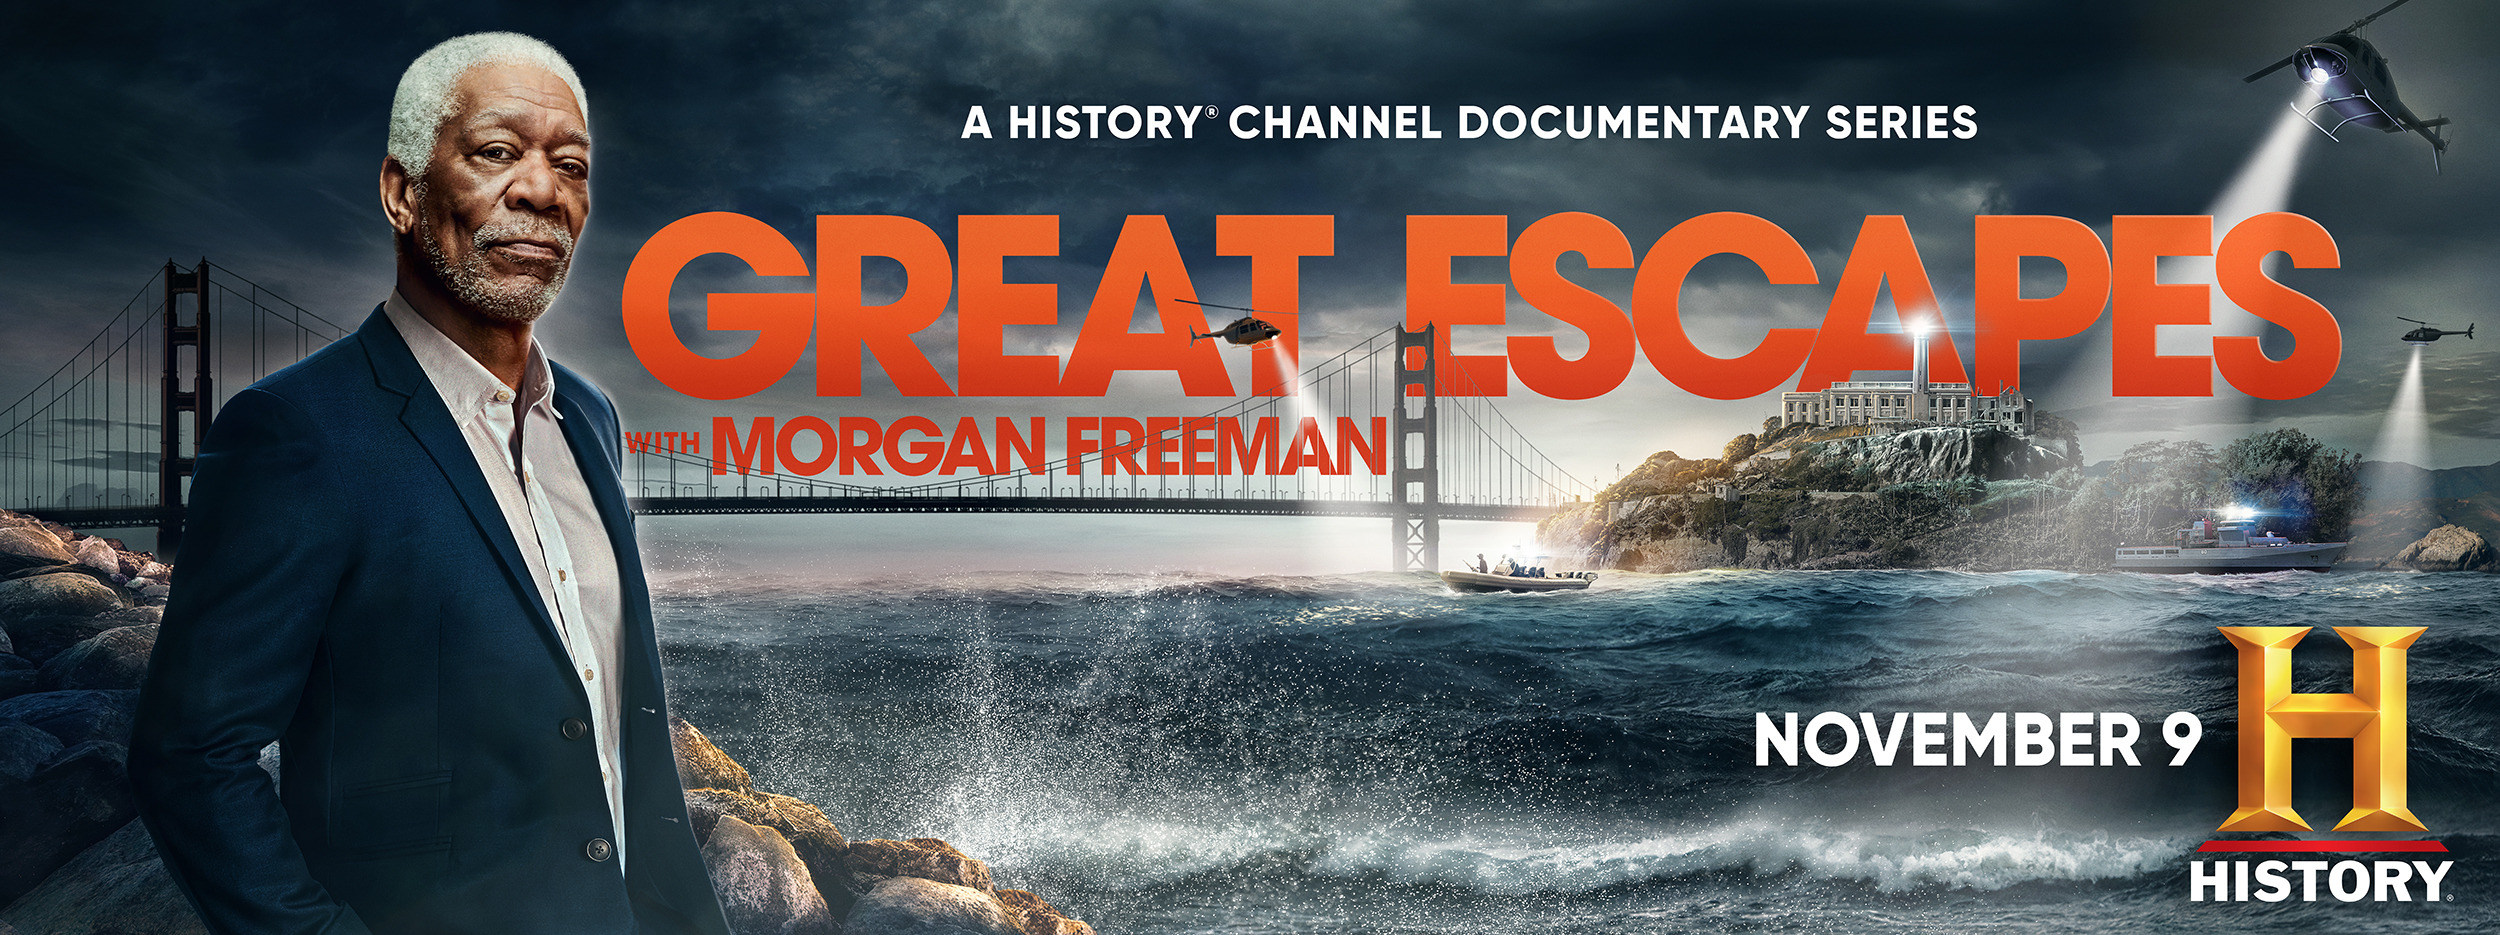 Mega Sized TV Poster Image for Great Escapes with Morgan Freeman (#2 of 2)